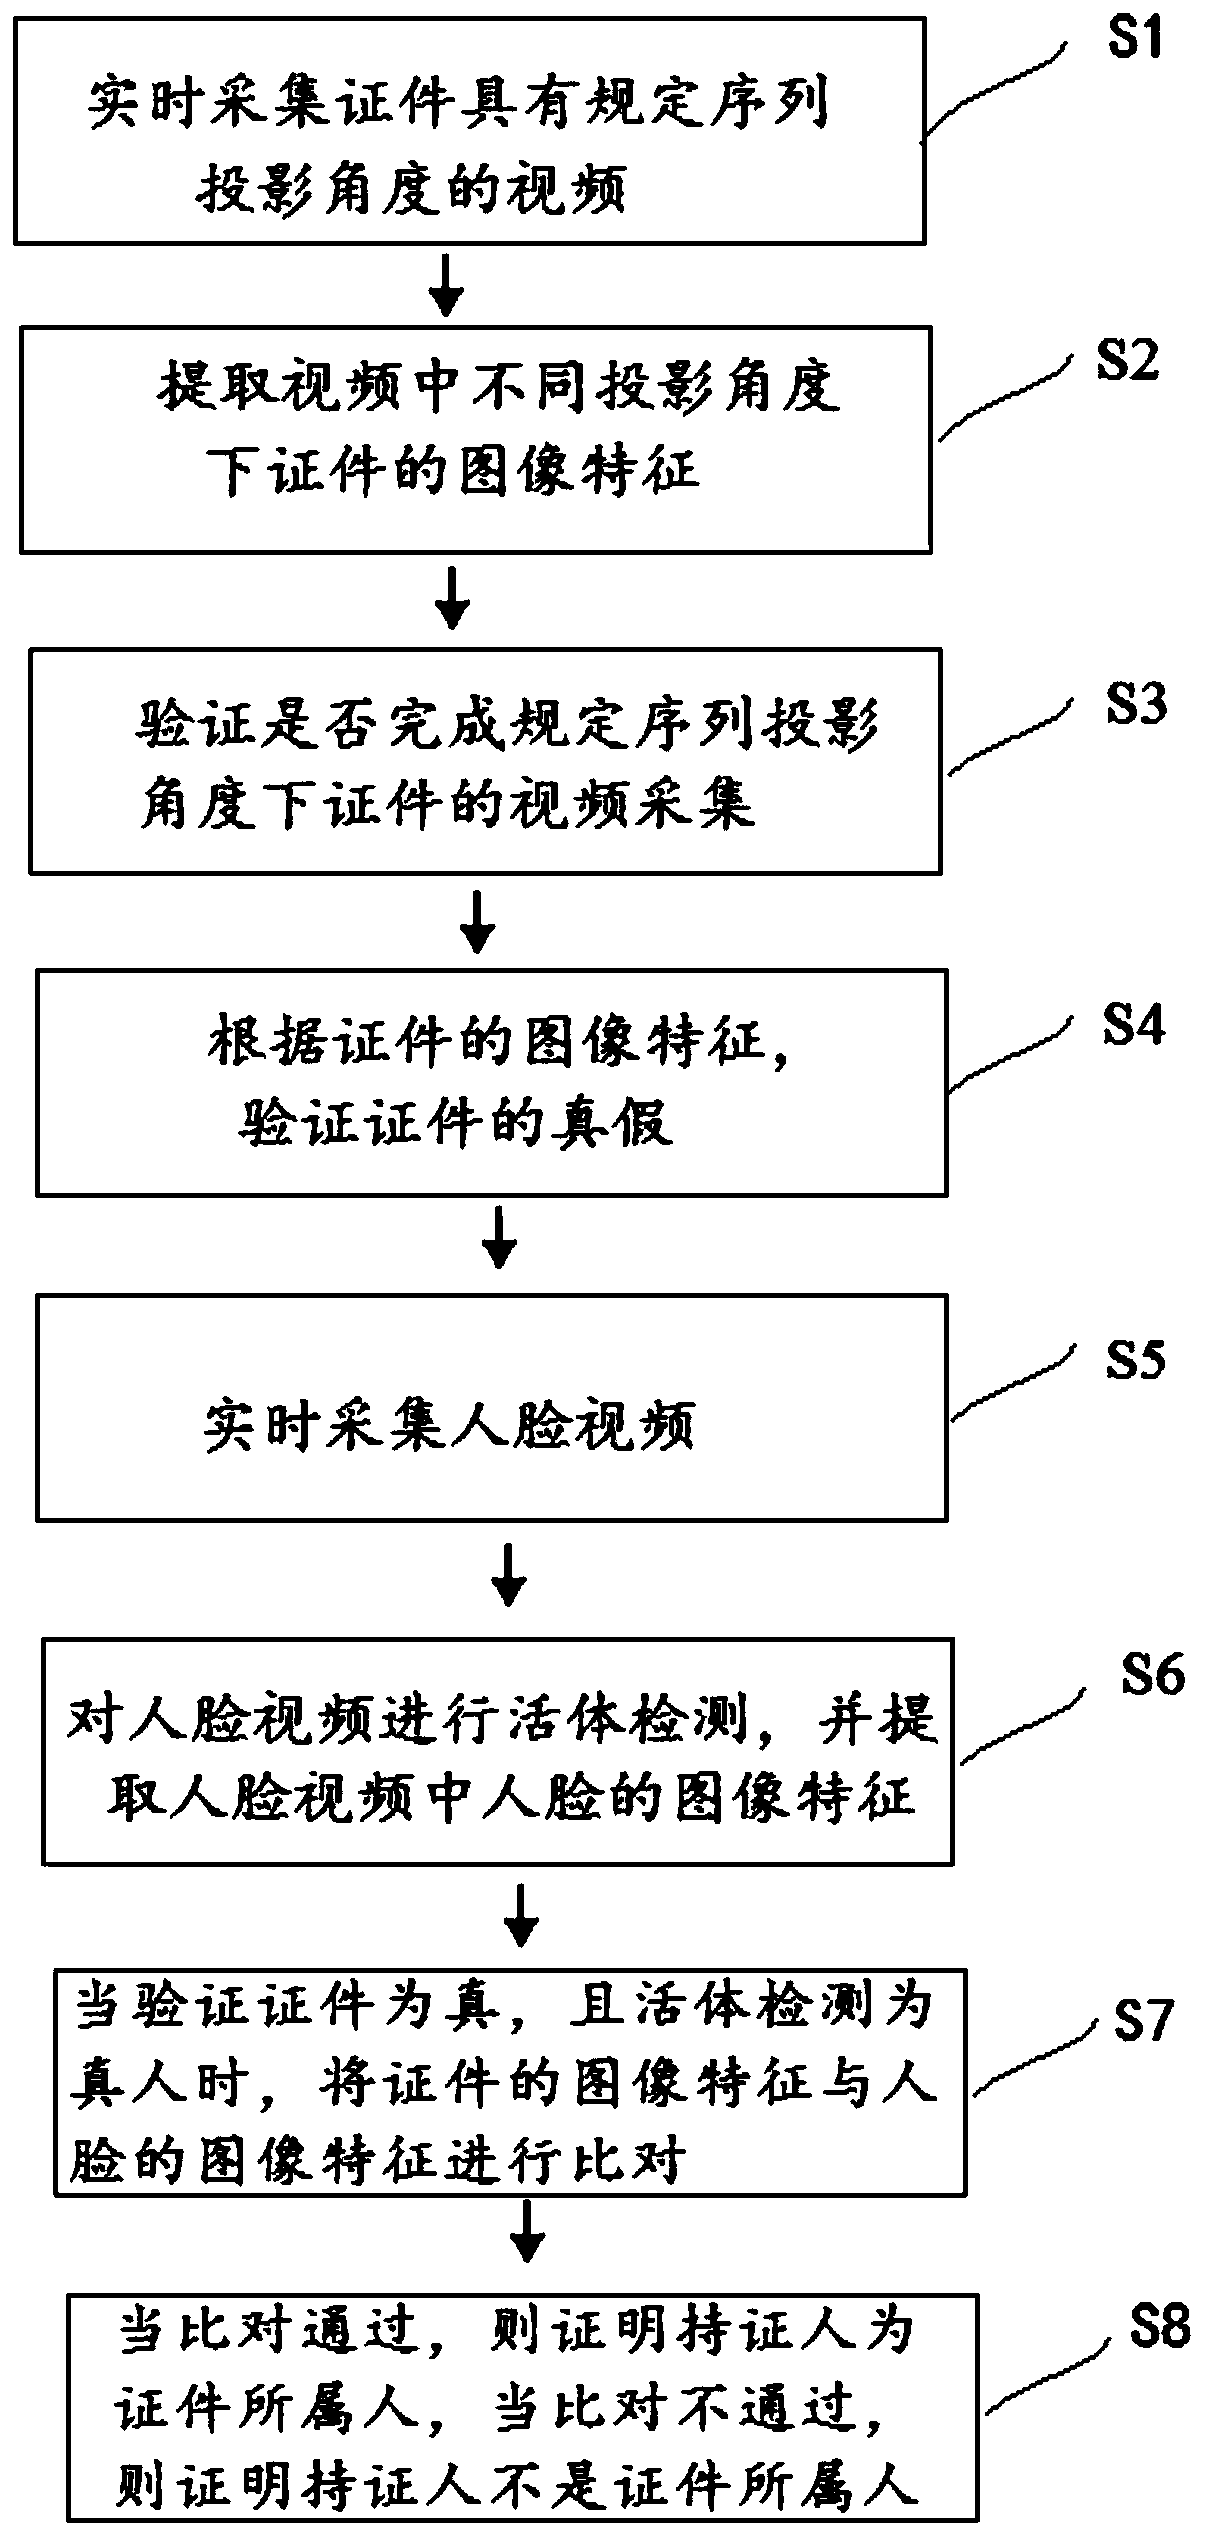 Method and system for verifying certificate and certificate holder